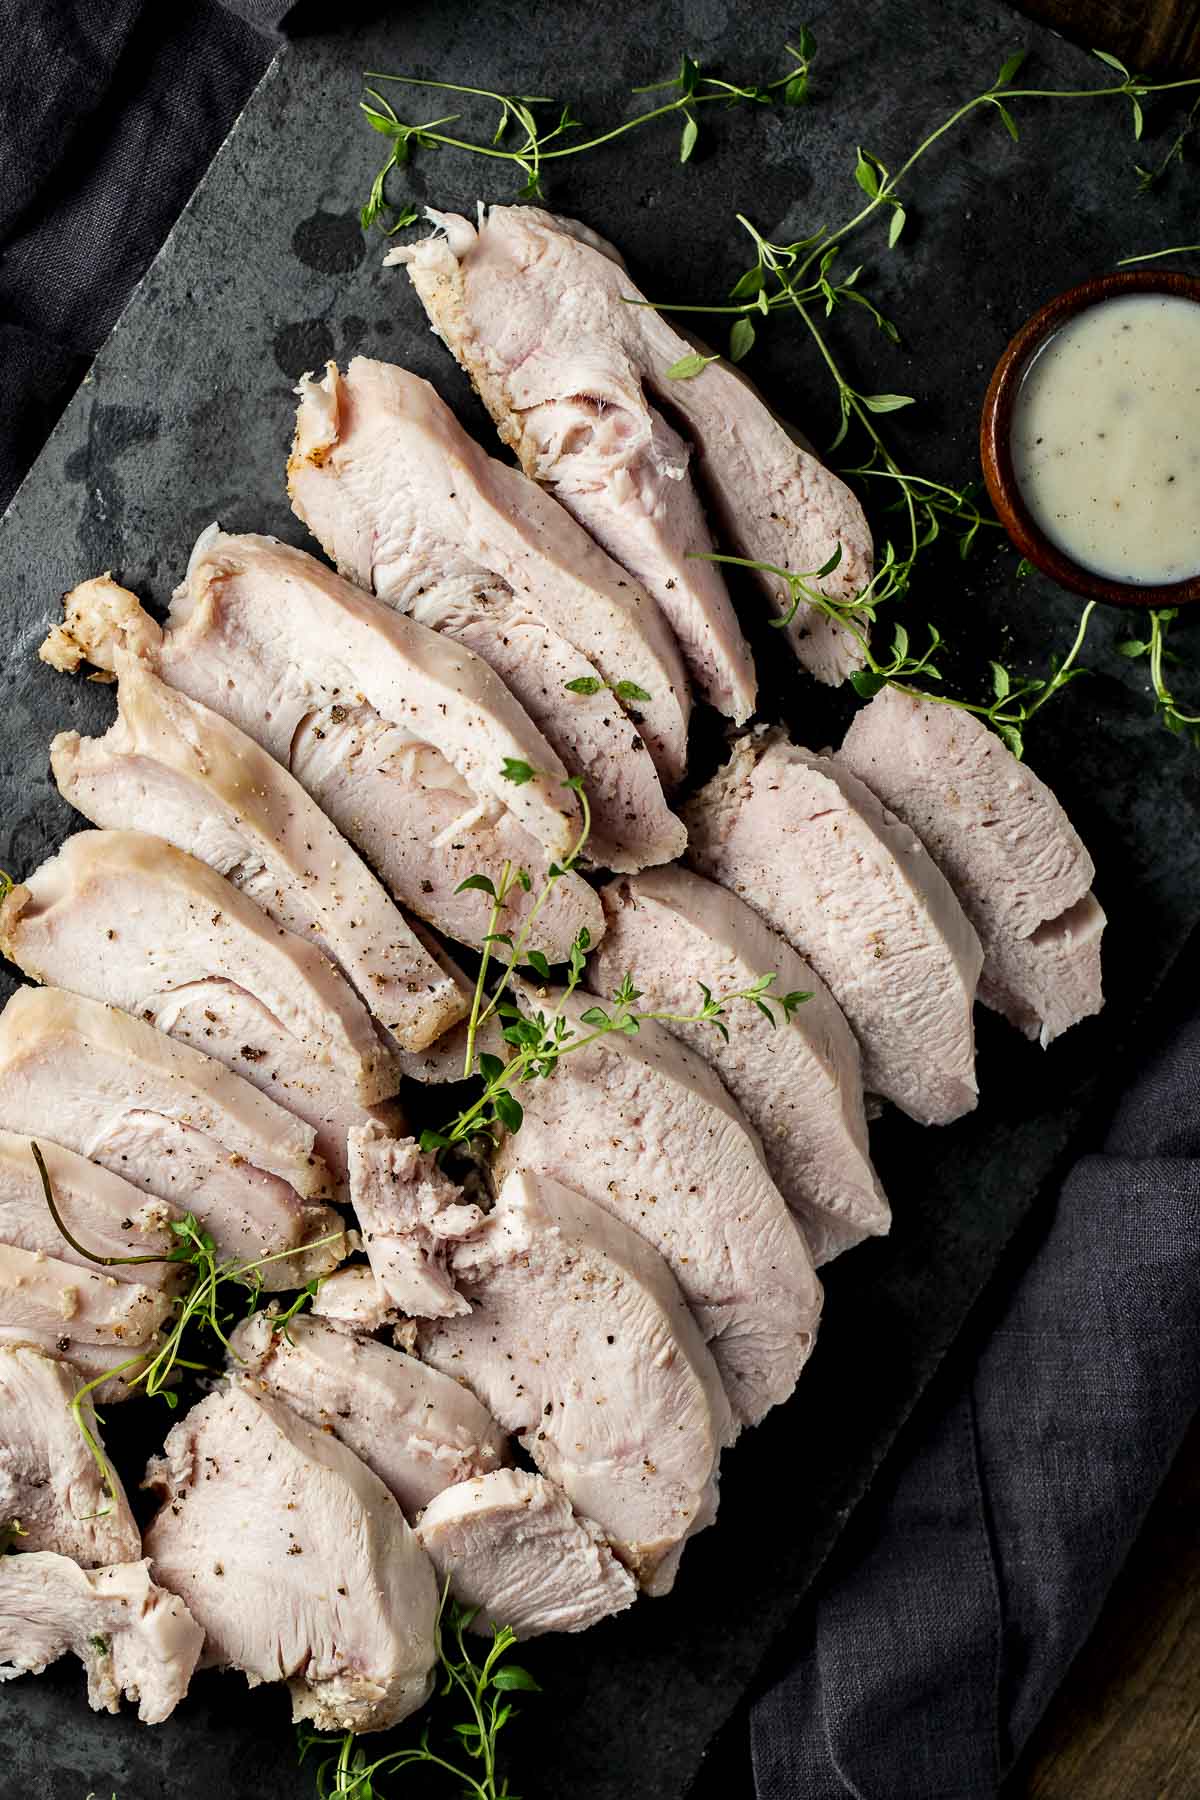 Sous Vide Turkey Breast - This